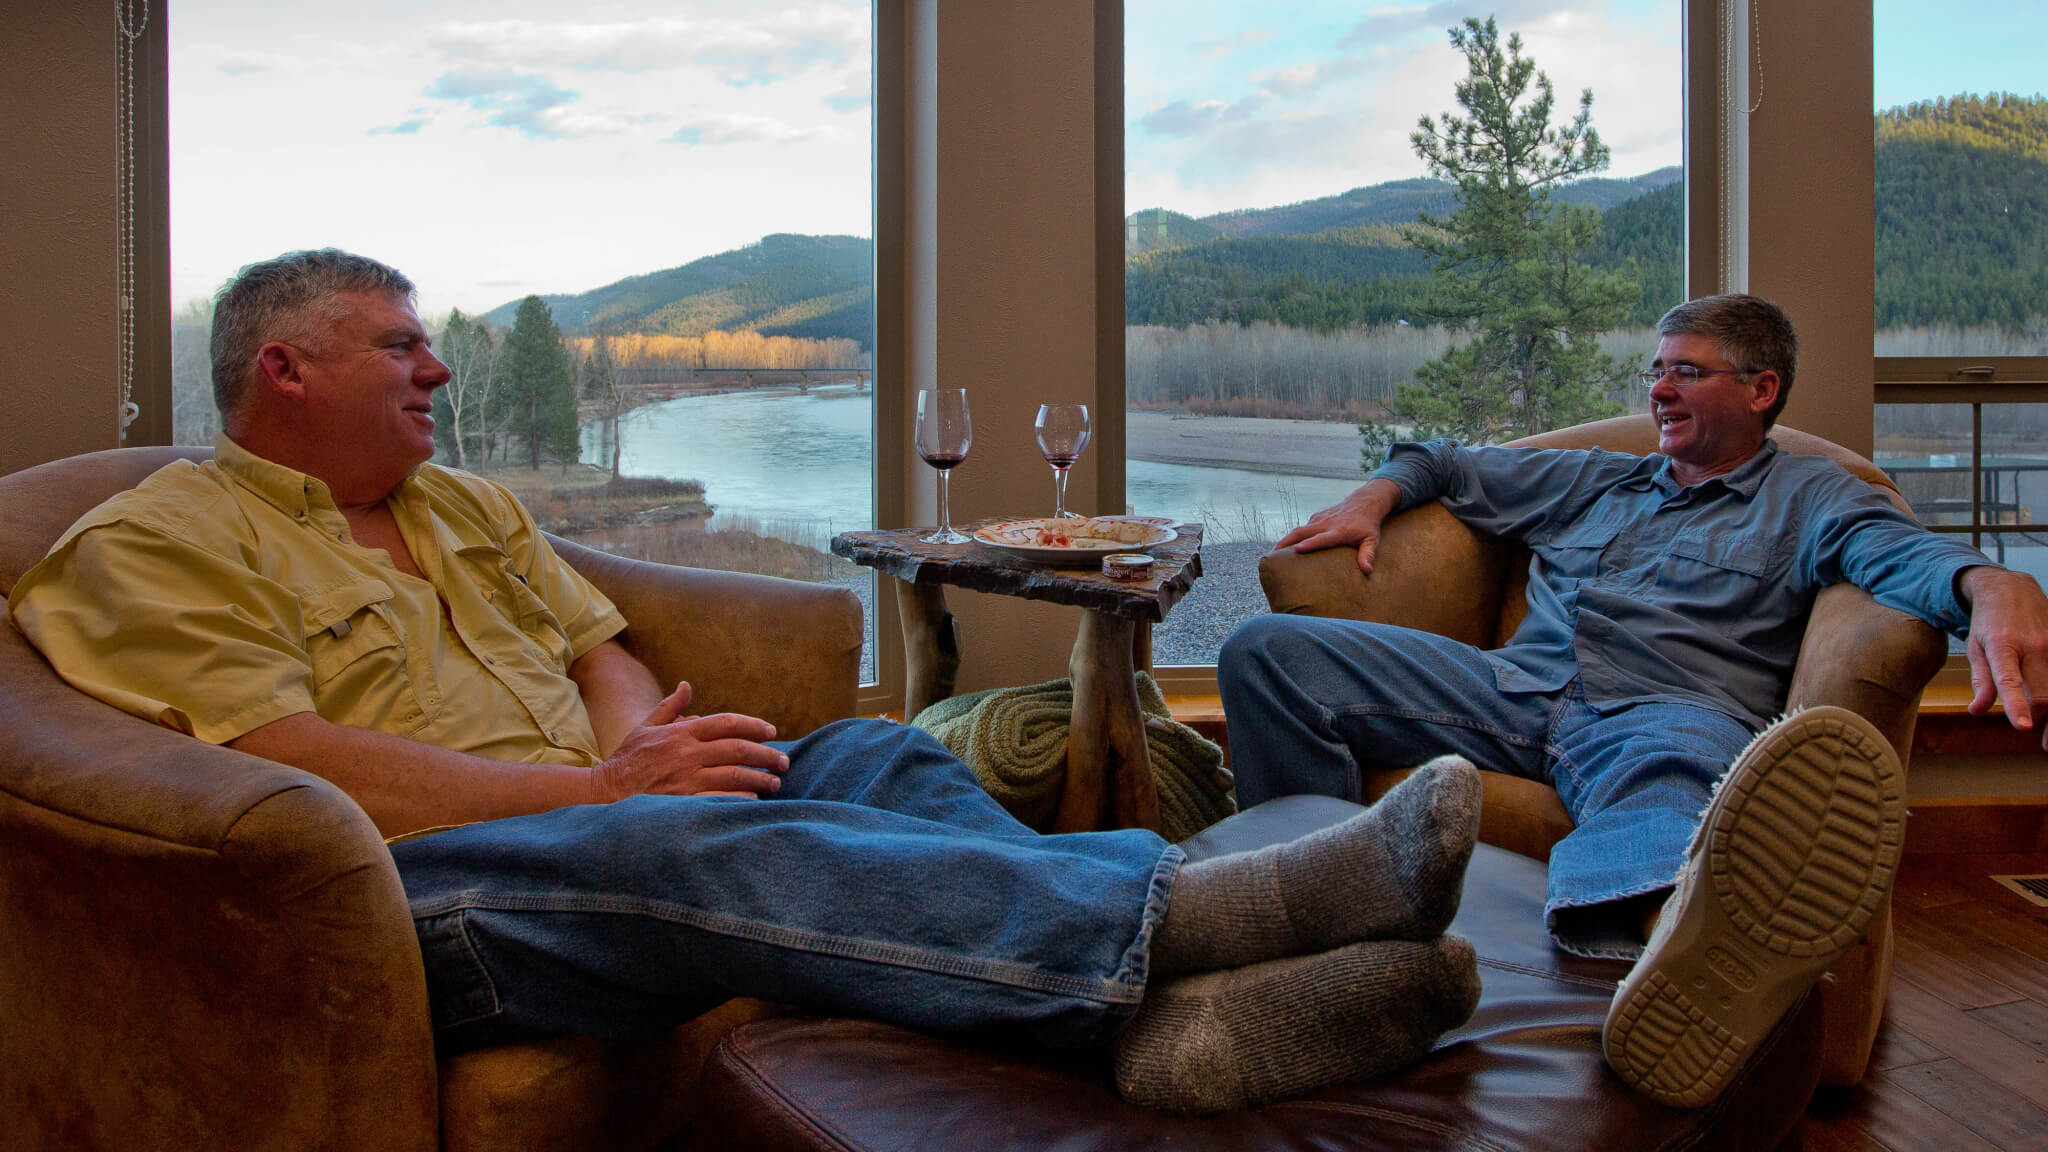 Two people lounging in lodge.